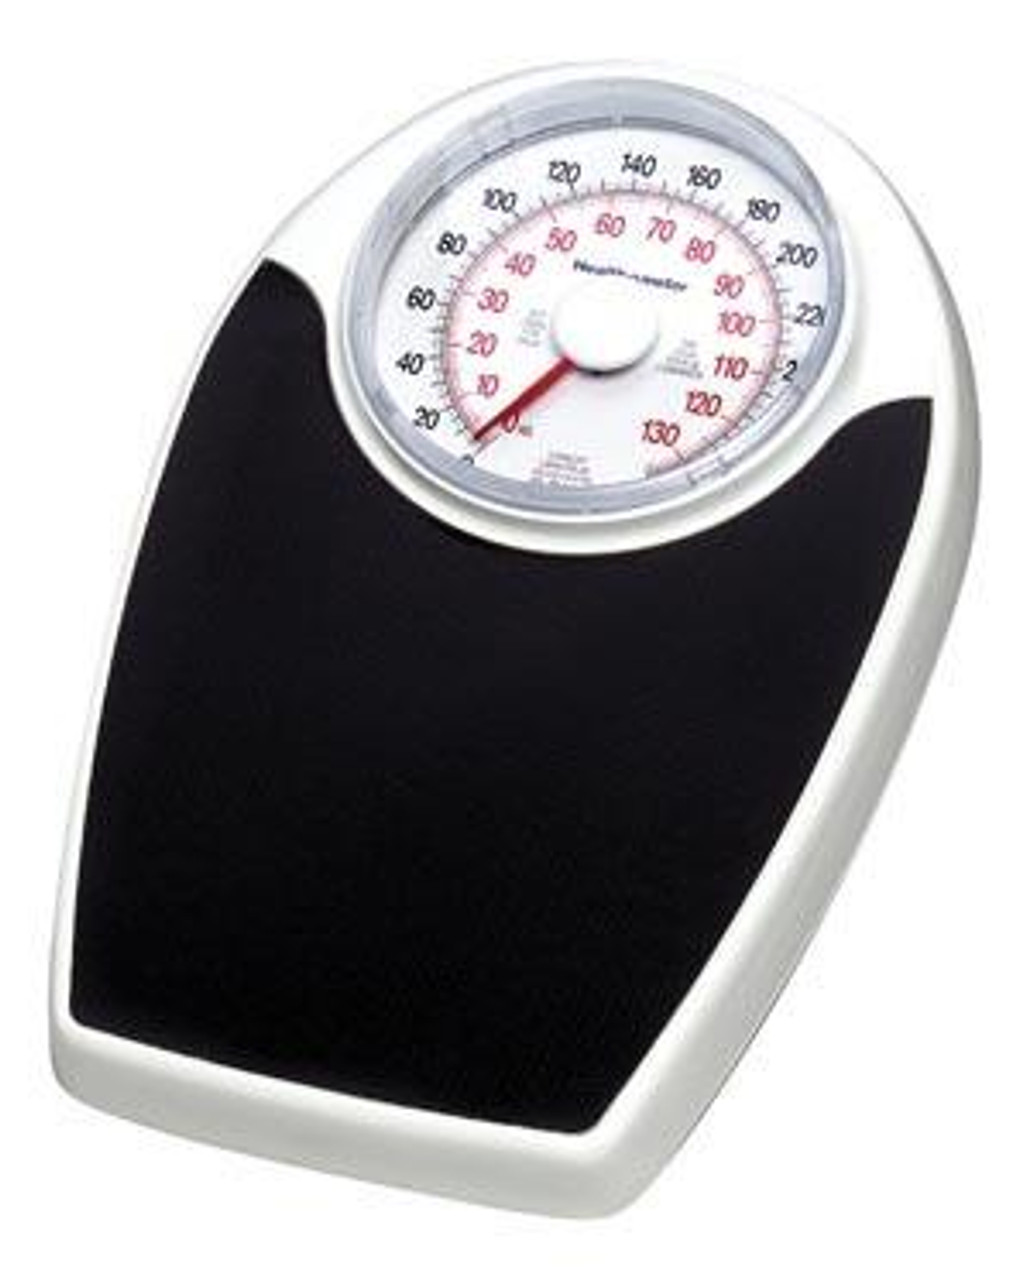 Health o meter Professional Scales 